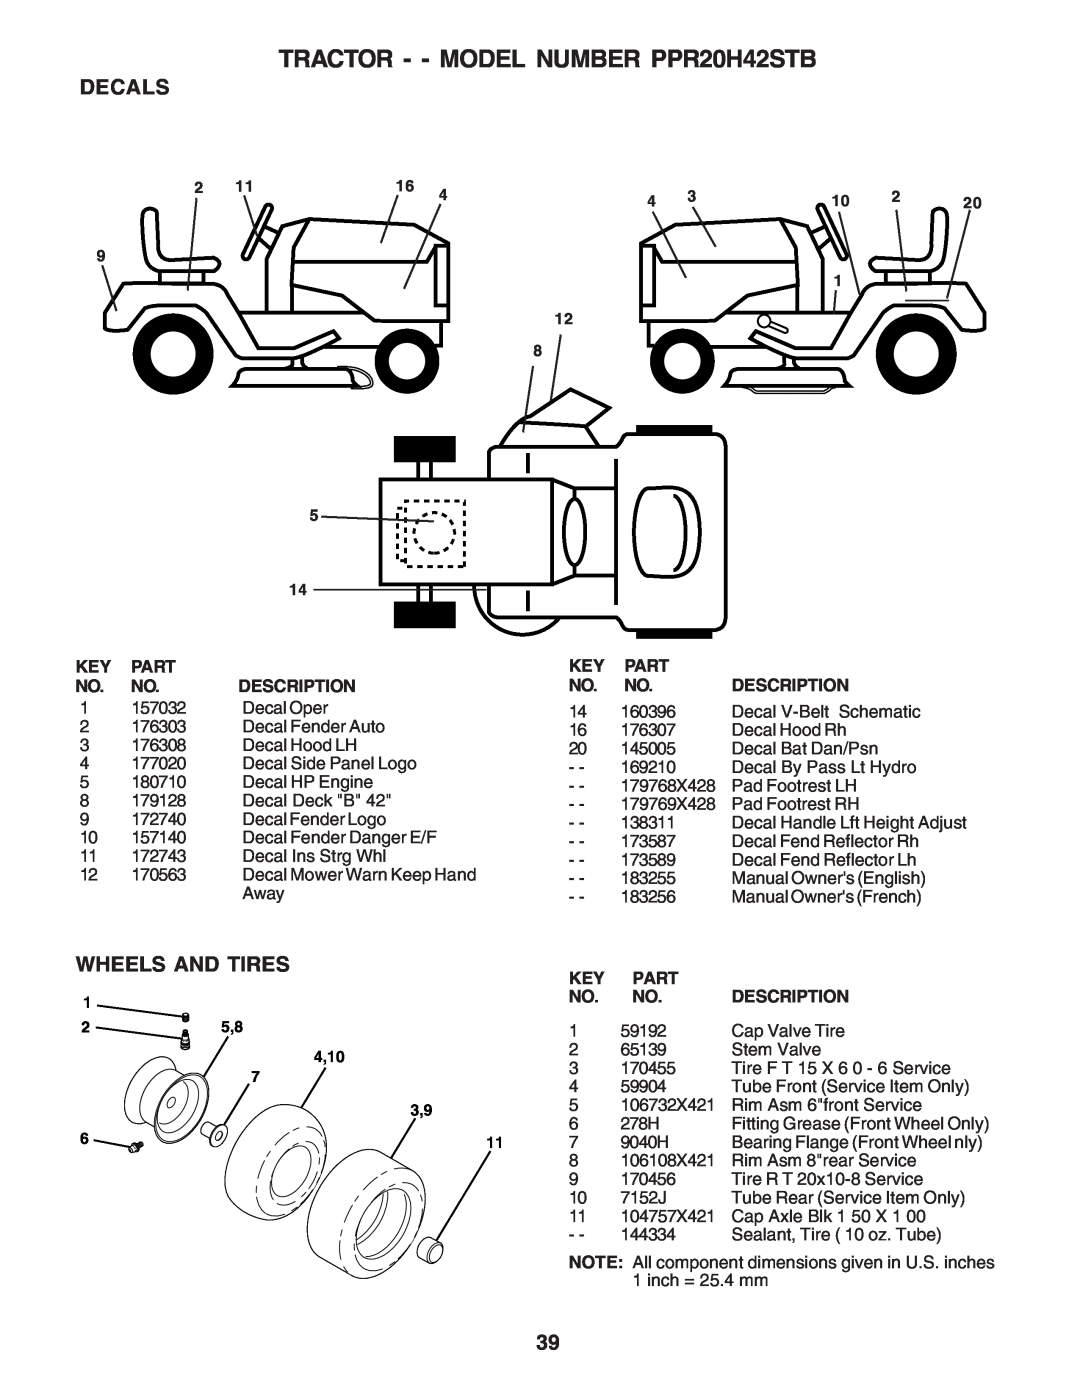 Poulan owner manual Decals, Wheels And Tires, TRACTOR - - MODEL NUMBER PPR20H42STB, 25,8 4,10 